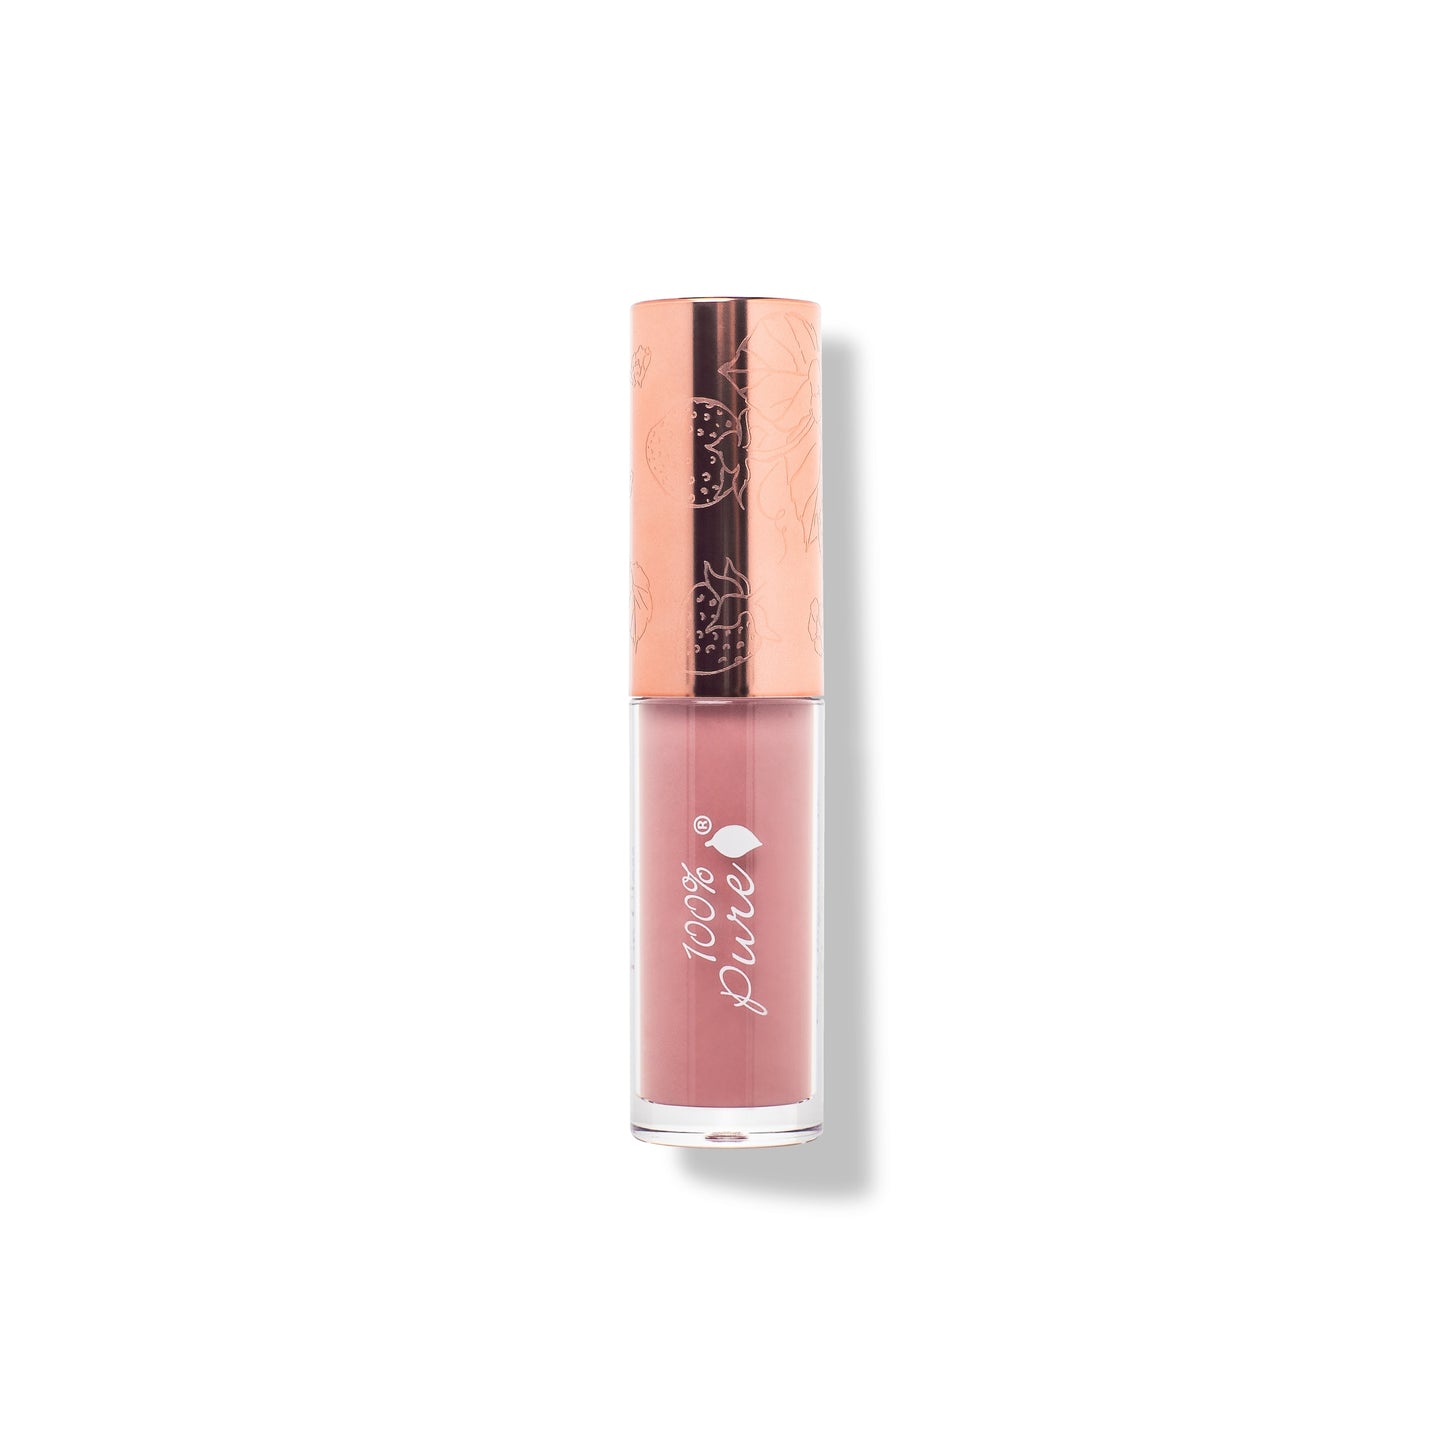 100% PURE Fruit Pigmented Lip Gloss mauvely